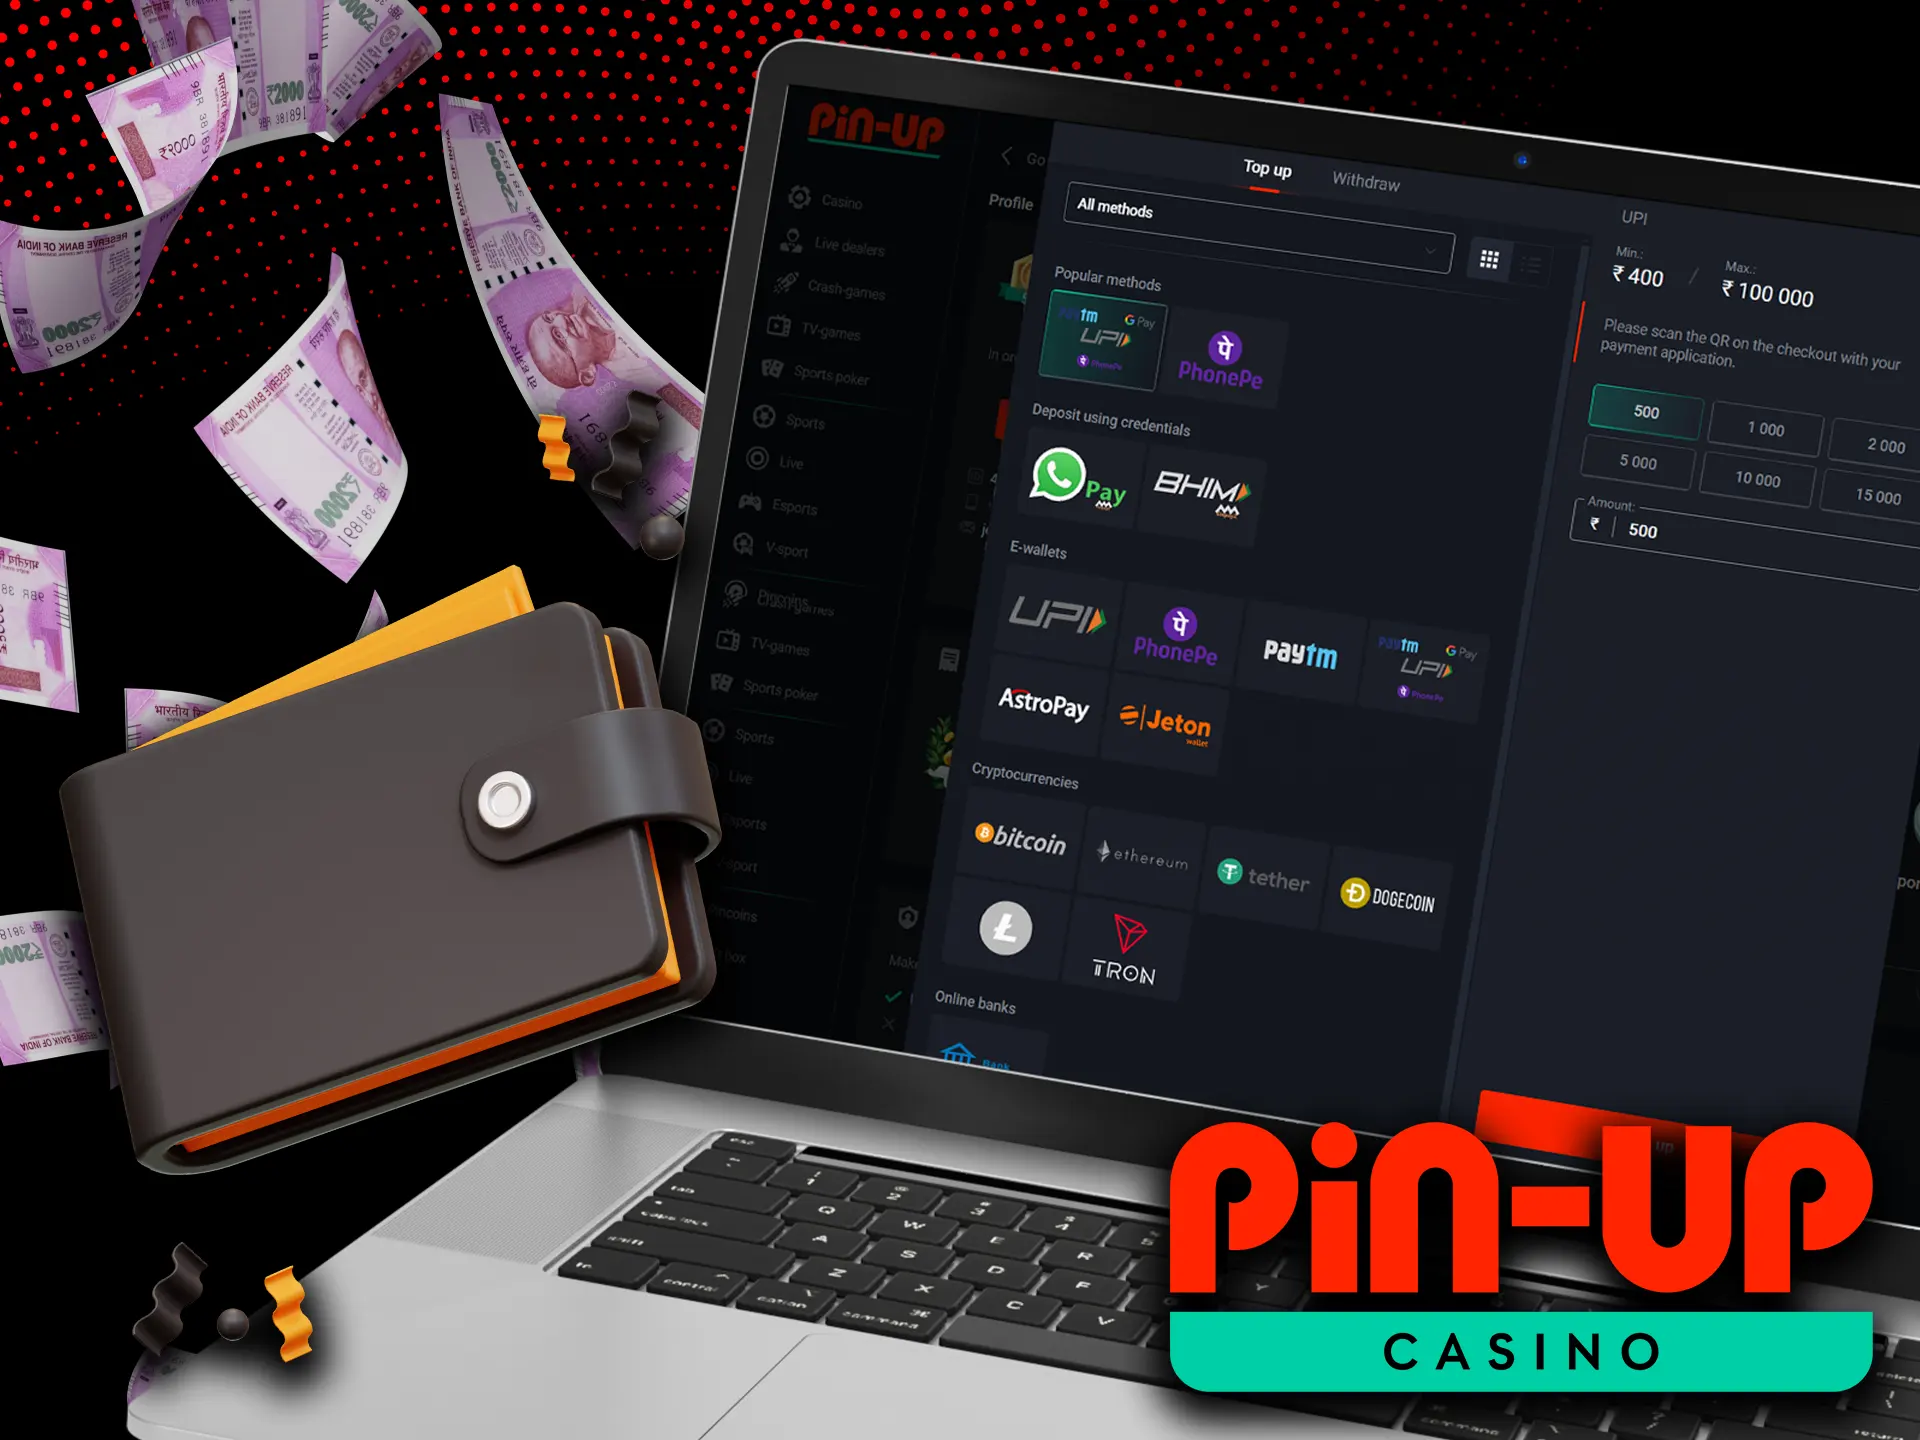 Open the cashier, choose a payment method and make a deposit to your Pin-Up gambling account.